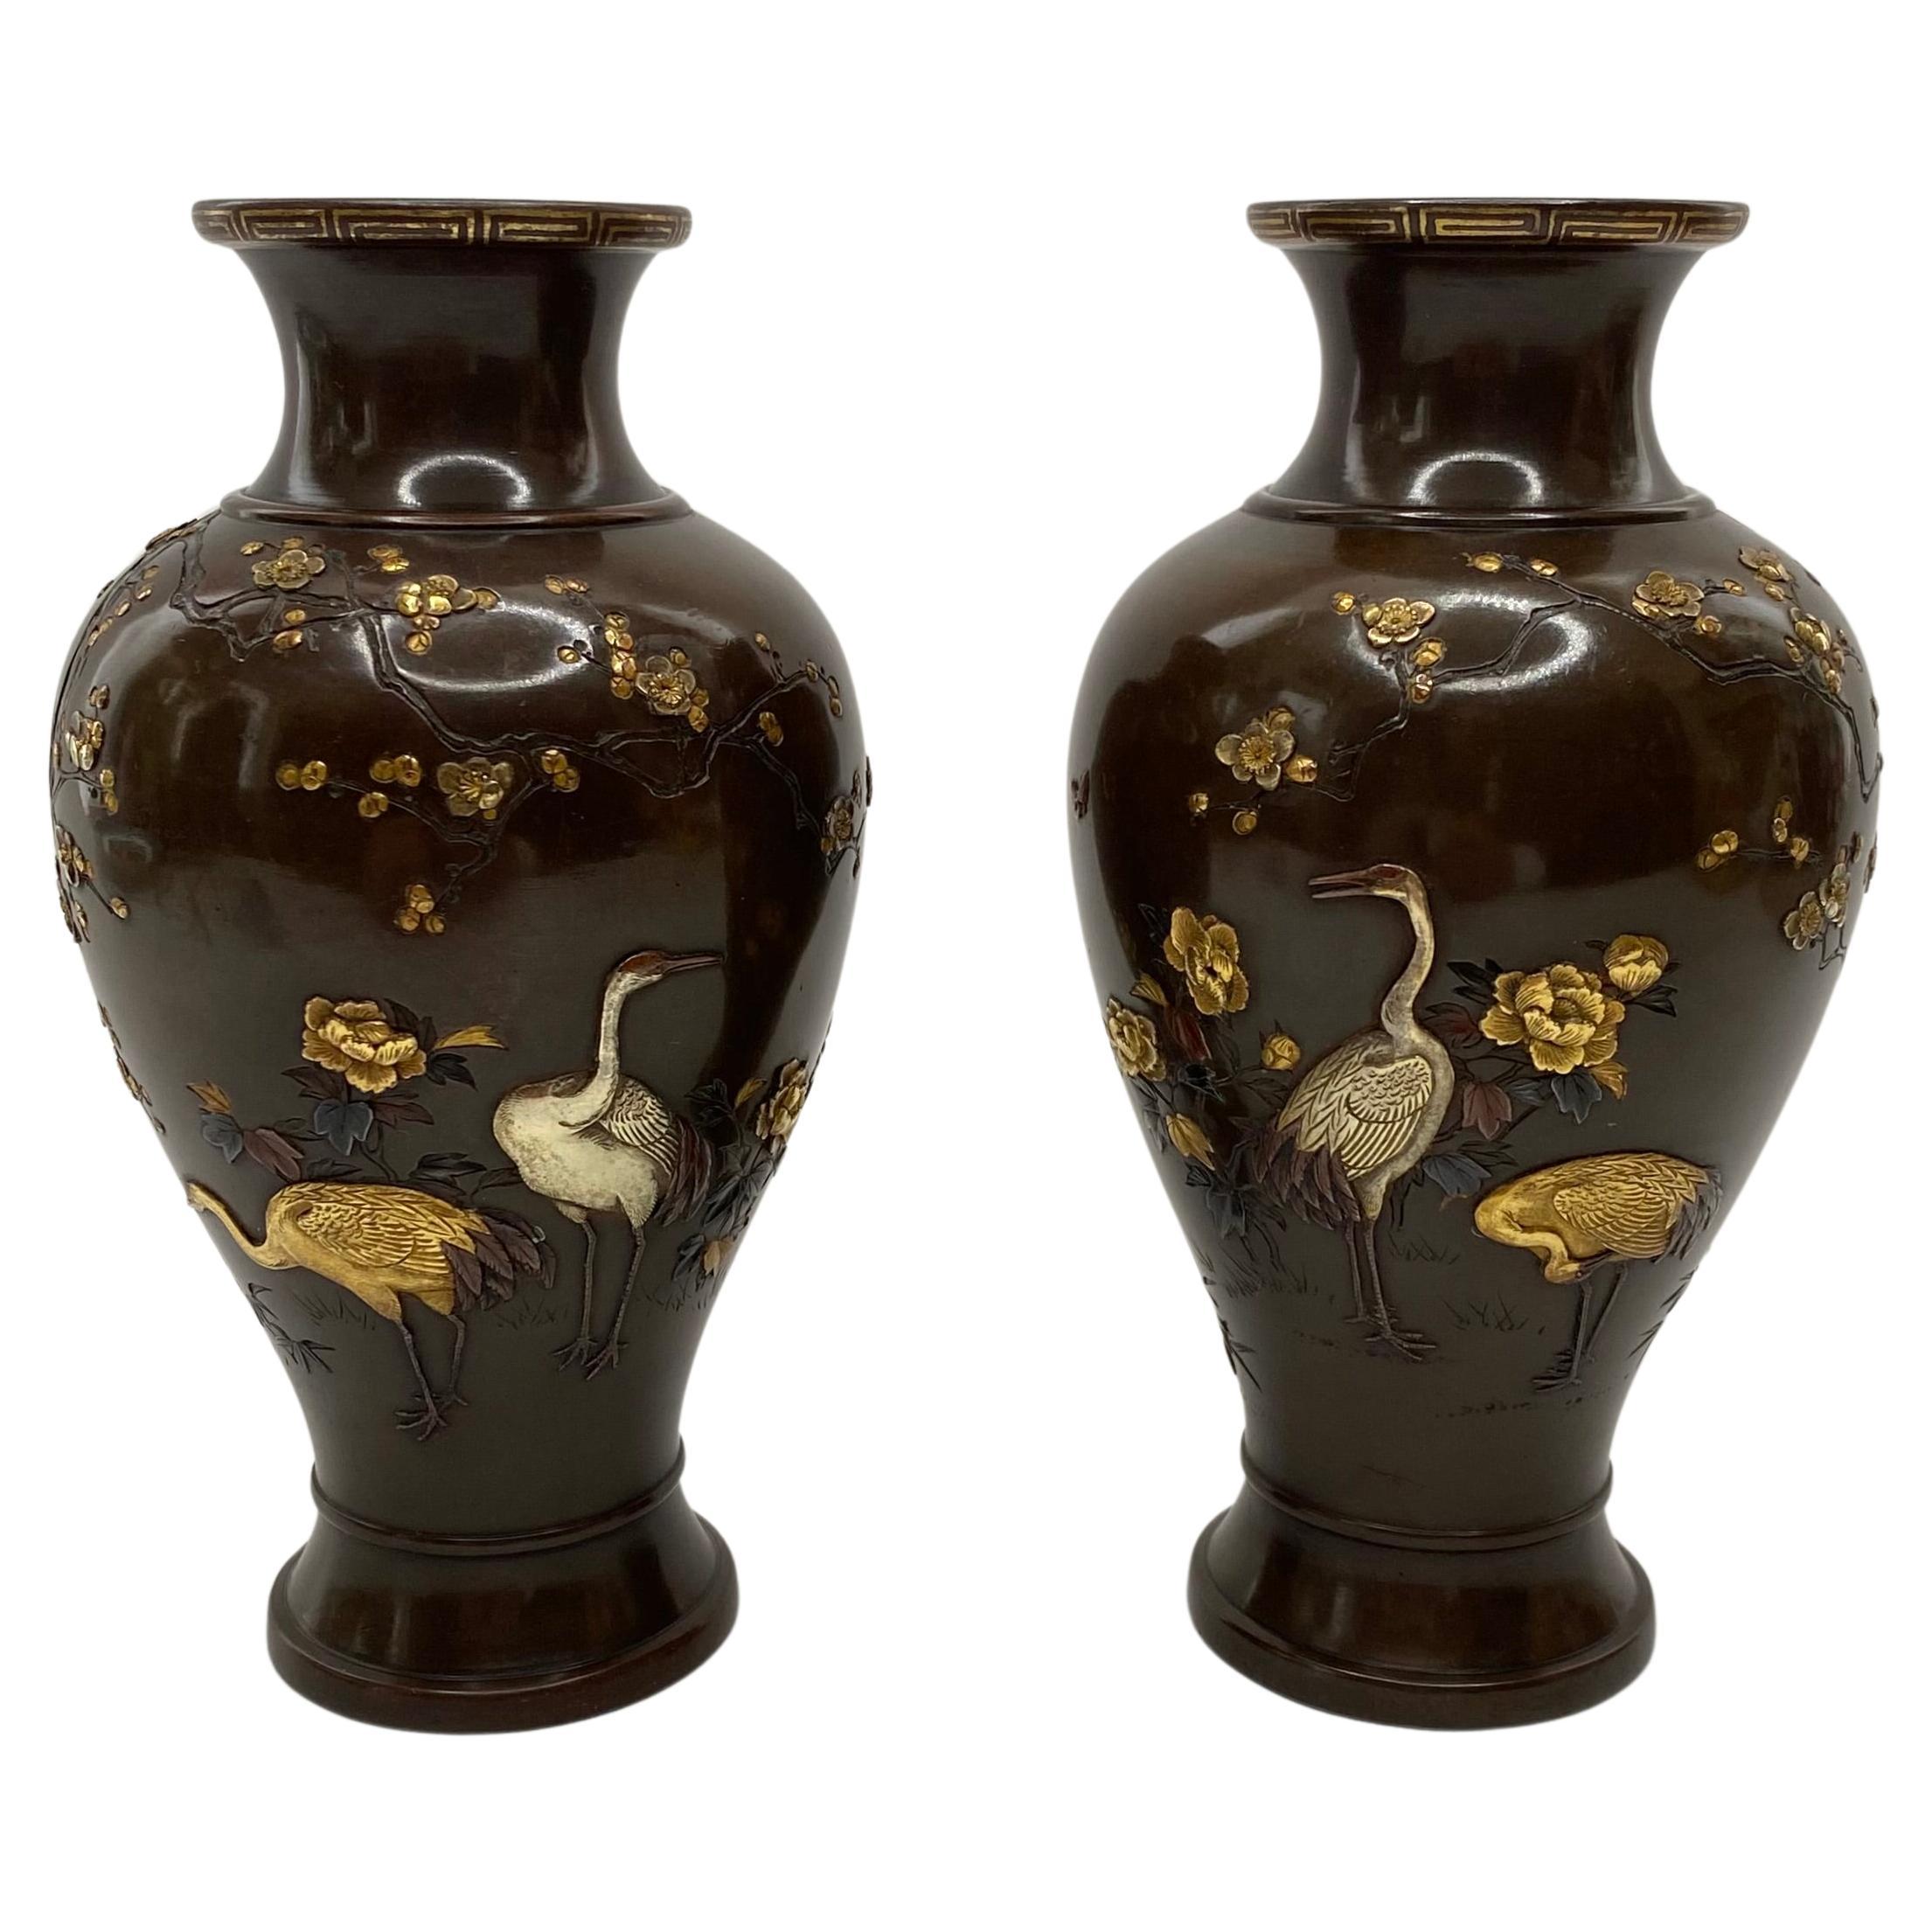 Japanese bronze and mixed metal vases, Inoue of Kyoto, Meiji Period.